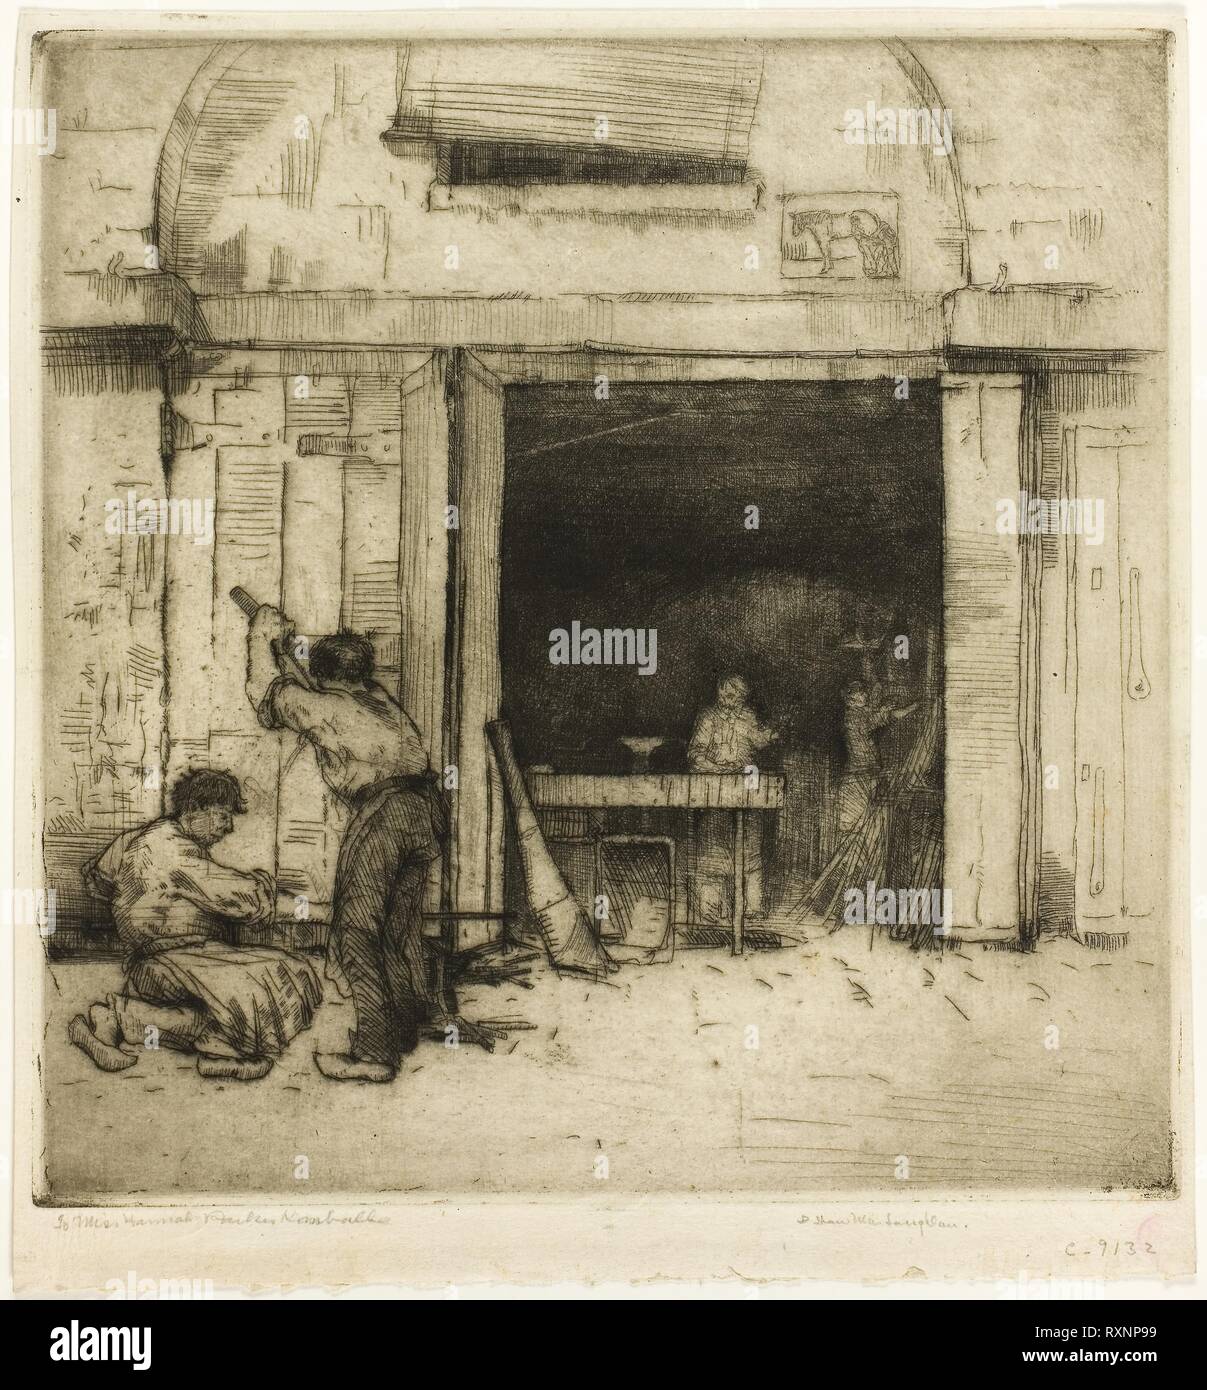 The Coppersmiths. Donald Shaw MacLaughlan; American, born Canada, 1876-1938. Date: 1900. Dimensions: 221 x 217 mm (image); 225 x 220 mm (plate); 244 x 227 mm (sheet). Etching in black on cream laid paper. Origin: United States. Museum: The Chicago Art Institute. Stock Photo